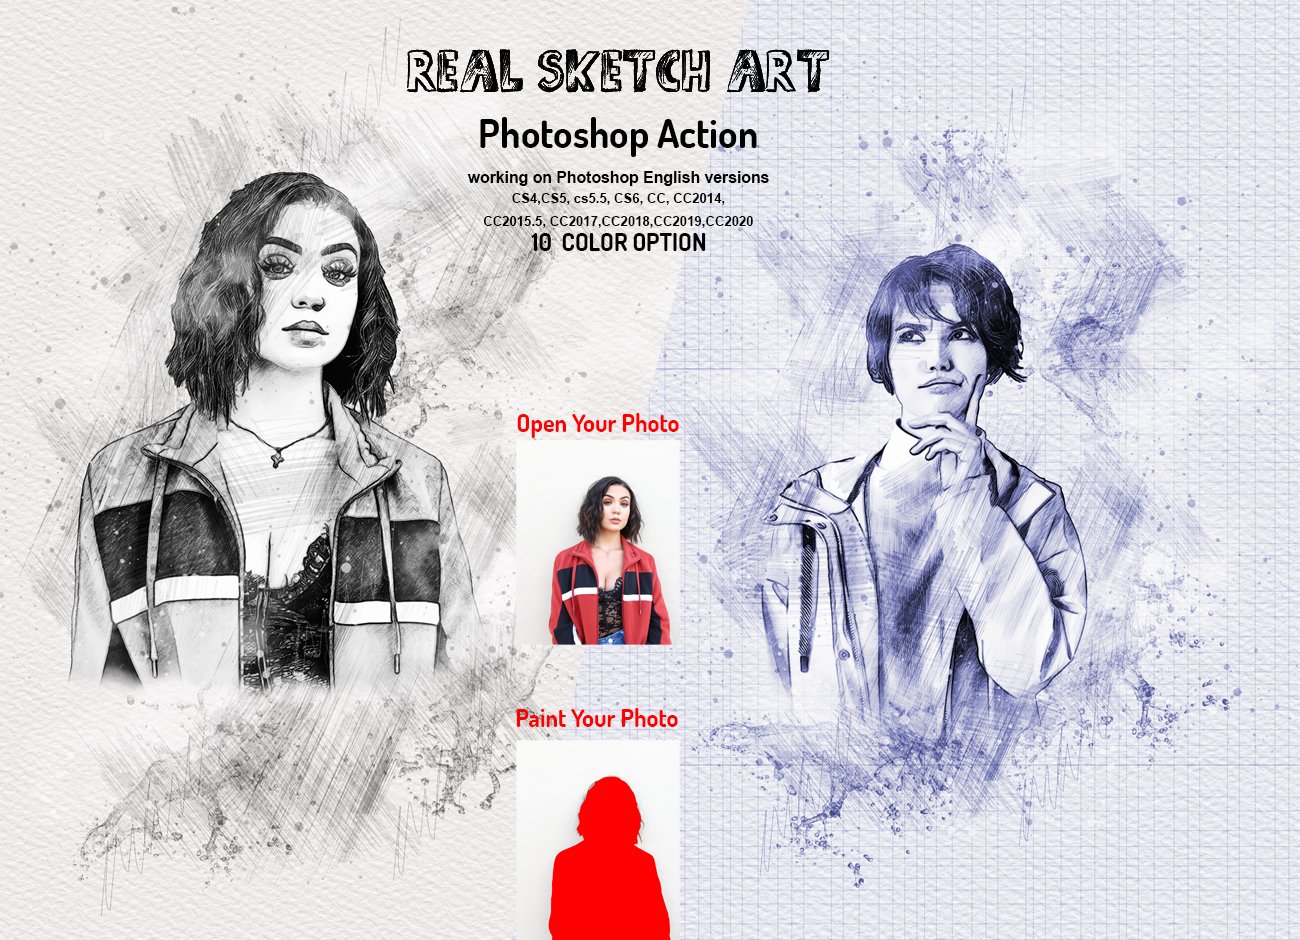 Real Sketch Art Photoshop Actioncover image.